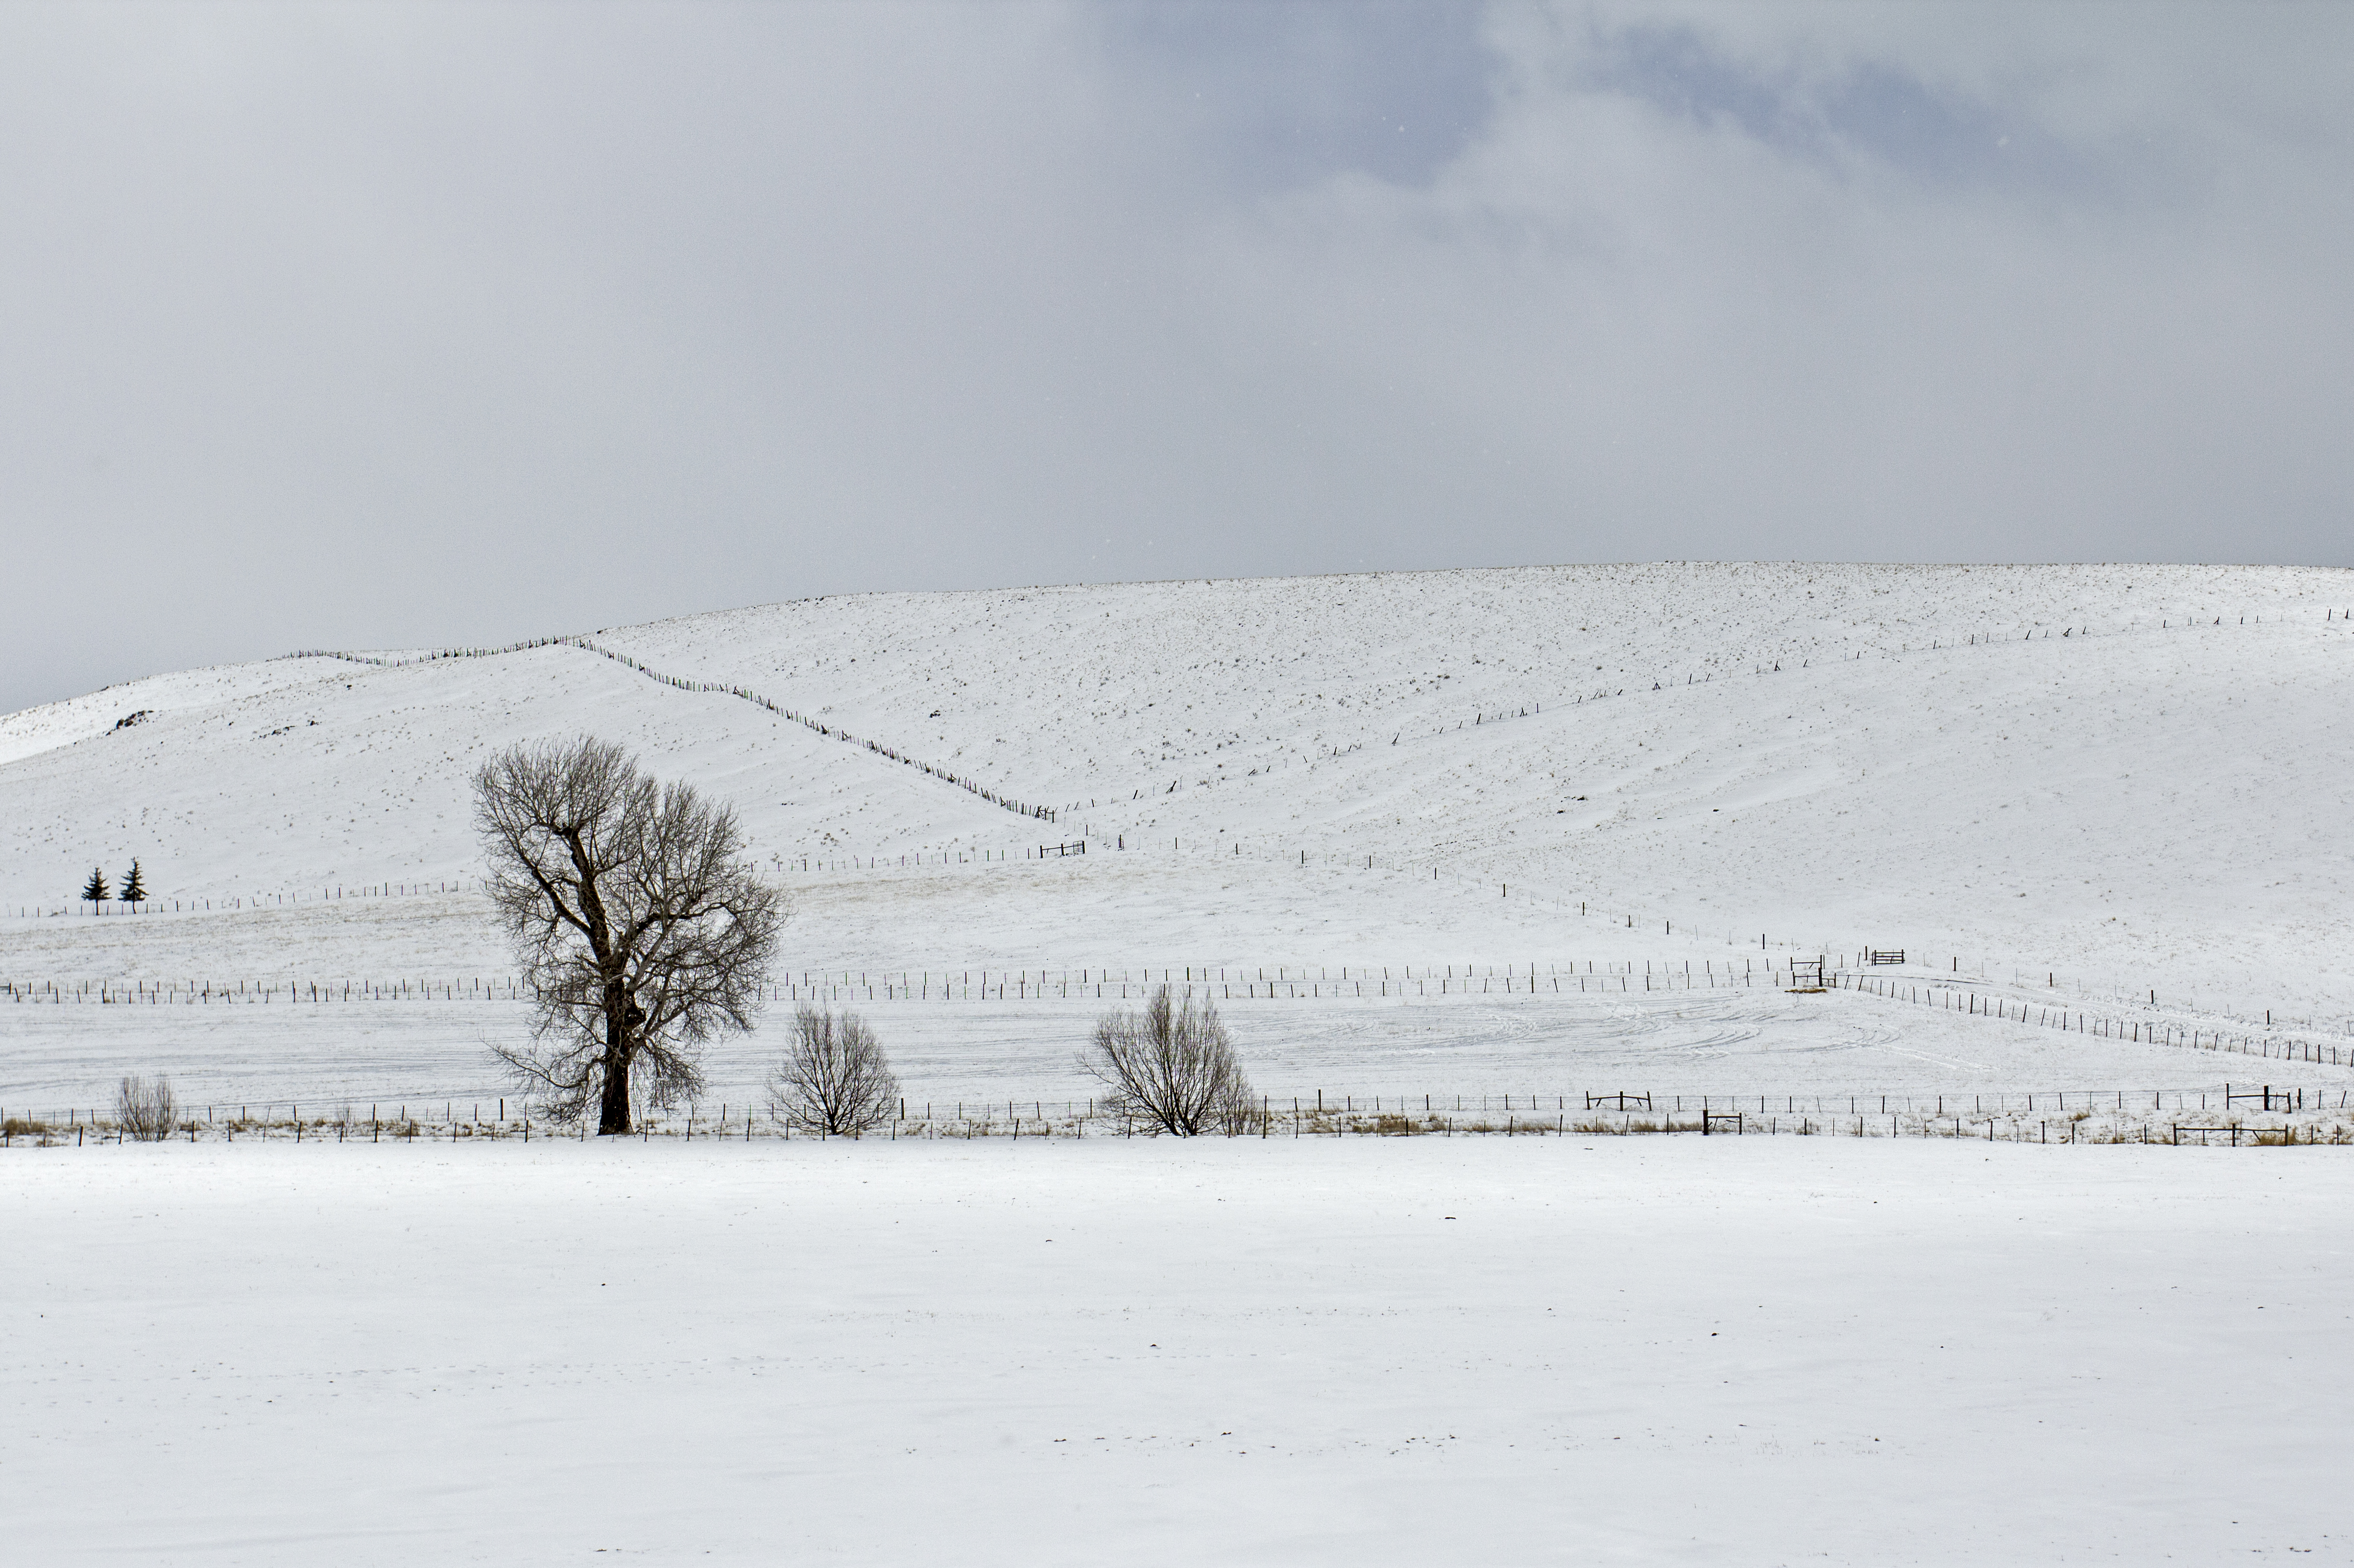 Eastern oregon ranch in snow photo